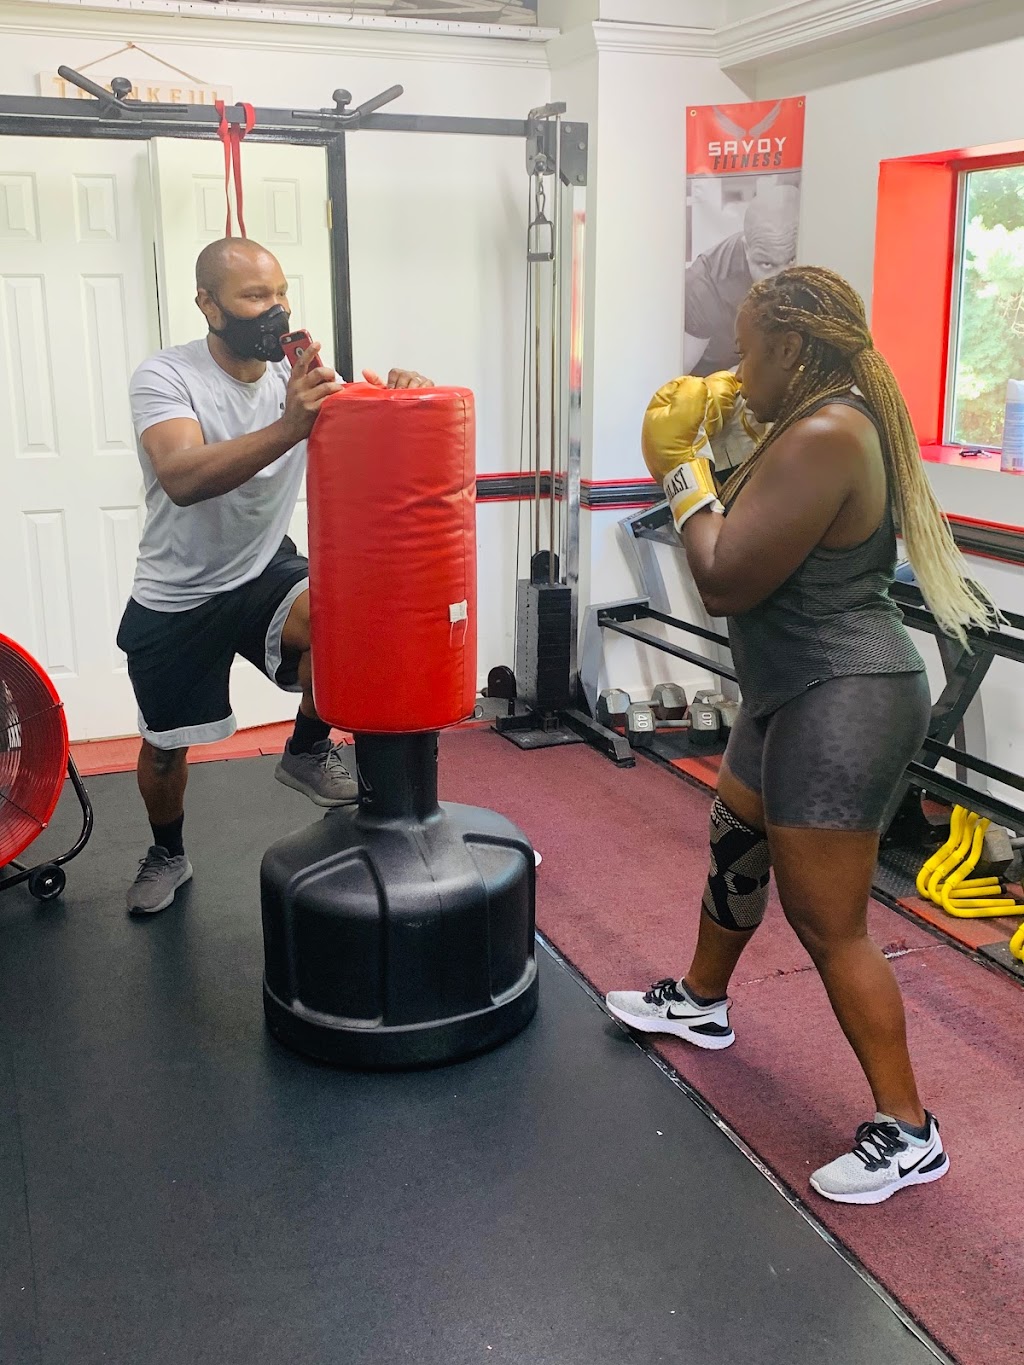 Savoy Fitness Training | 12800 Frederick Rd, West Friendship, MD 21794 | Phone: (240) 640-8788